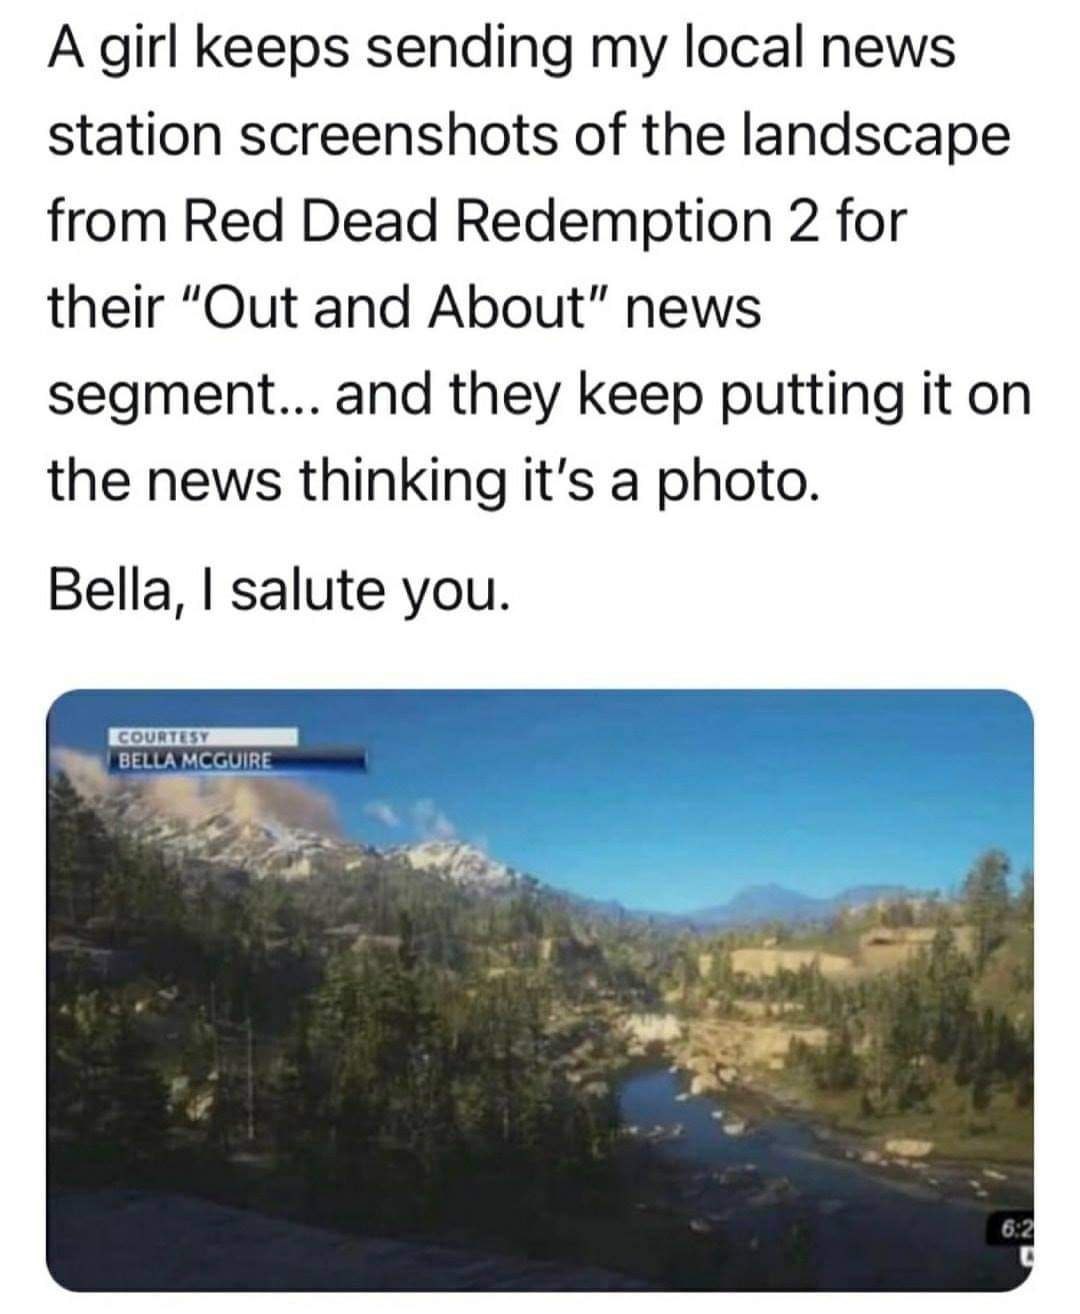 red dead redemption 2 local news - A girl keeps sending my local news station screenshots of the landscape from Red Dead Redemption 2 for their "Out and About" news segment... and they keep putting it on the news thinking it's a photo. Bella, I salute you